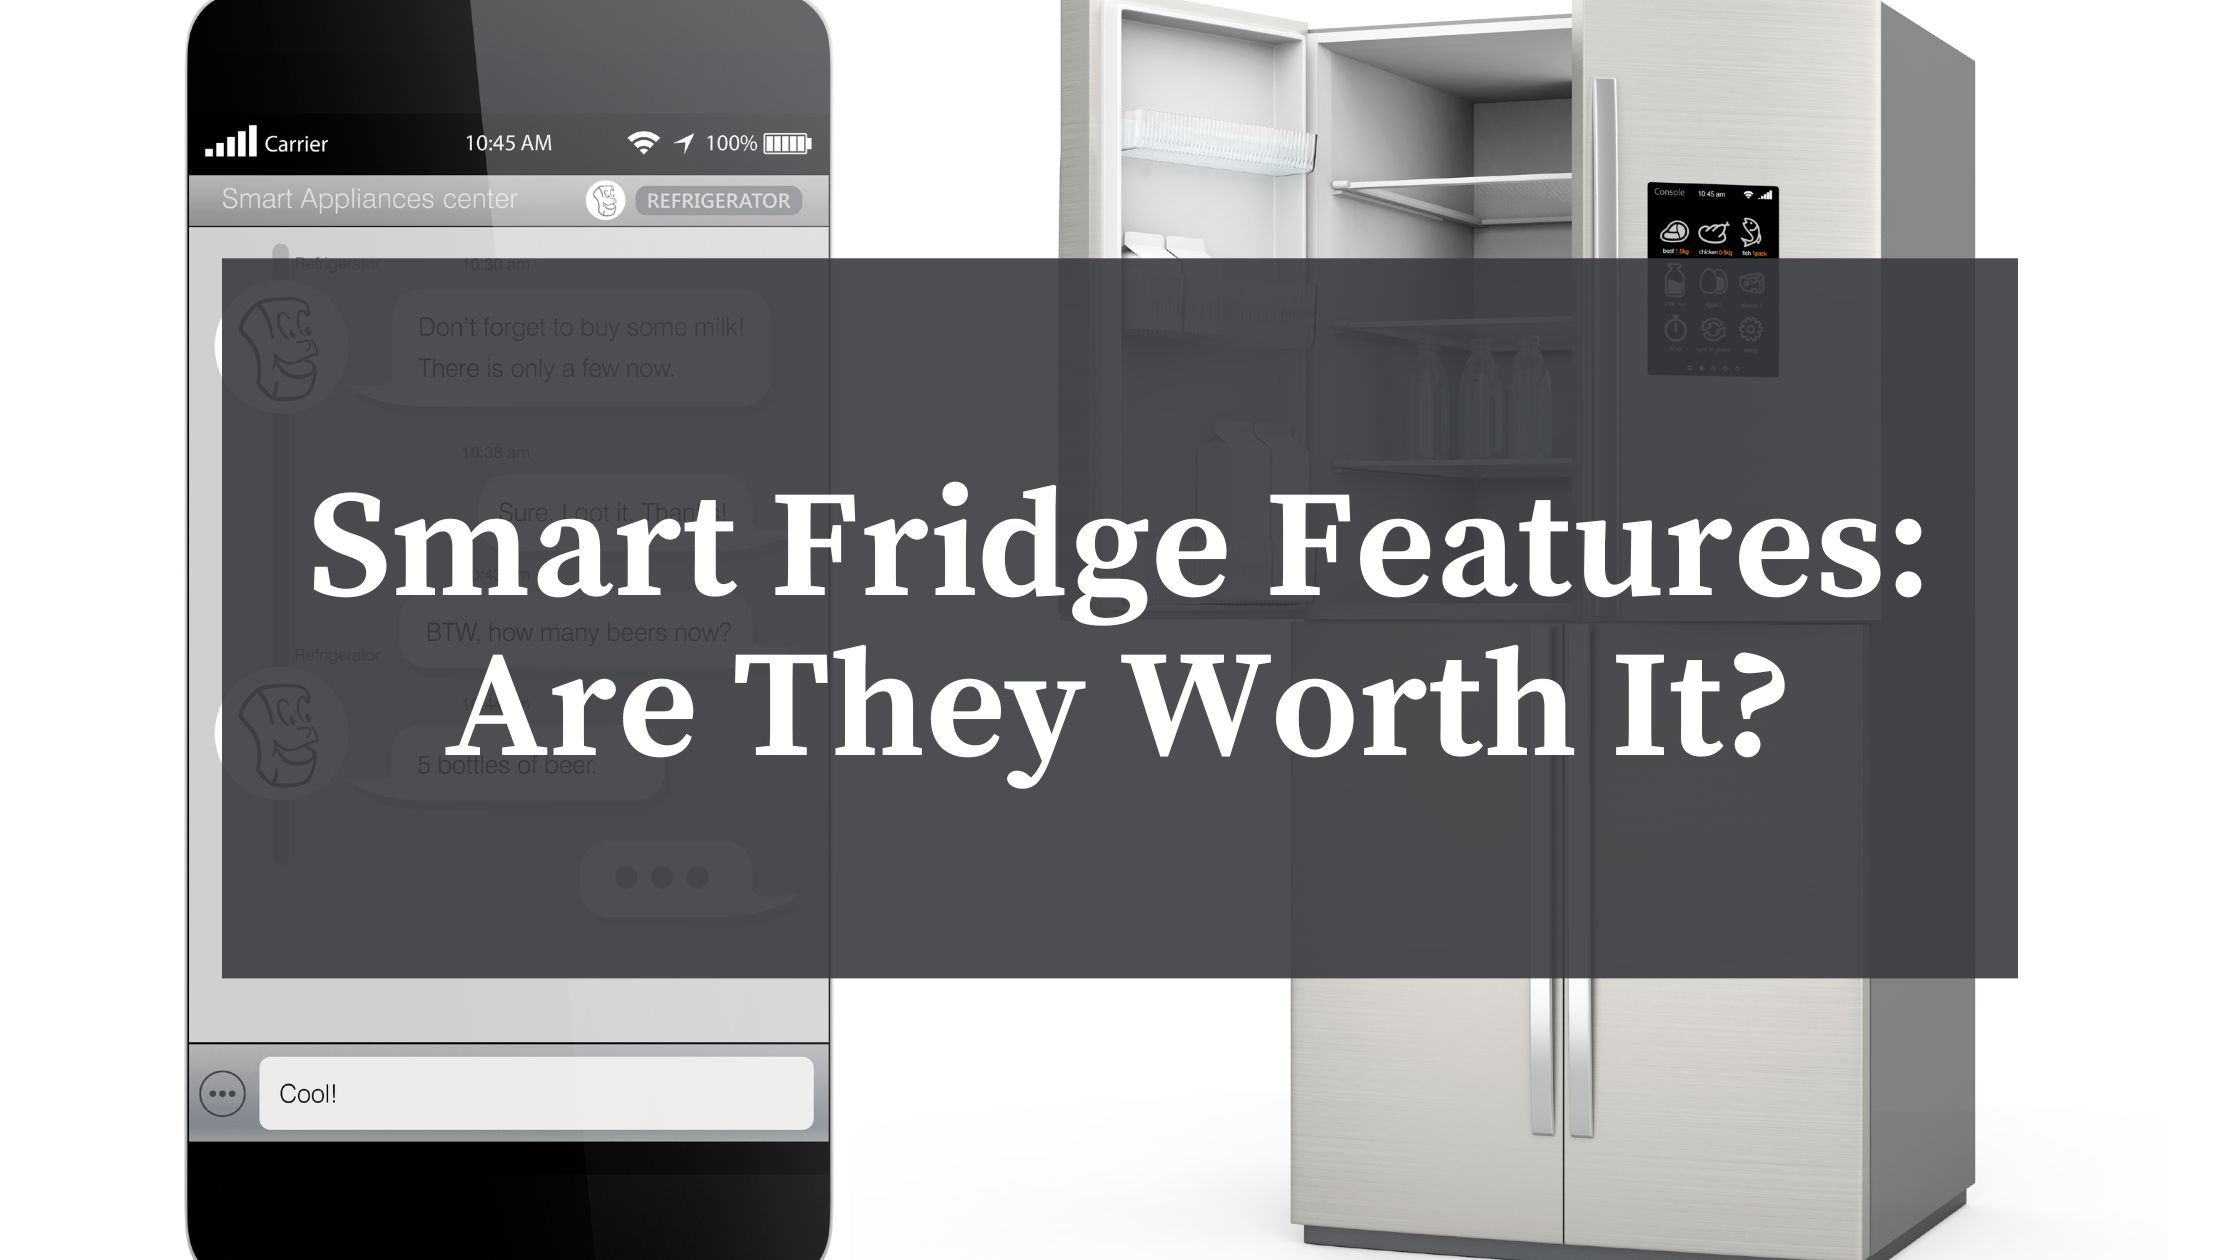 smart fridge features on display in this home kitchen refrigerator by using a cell phone app